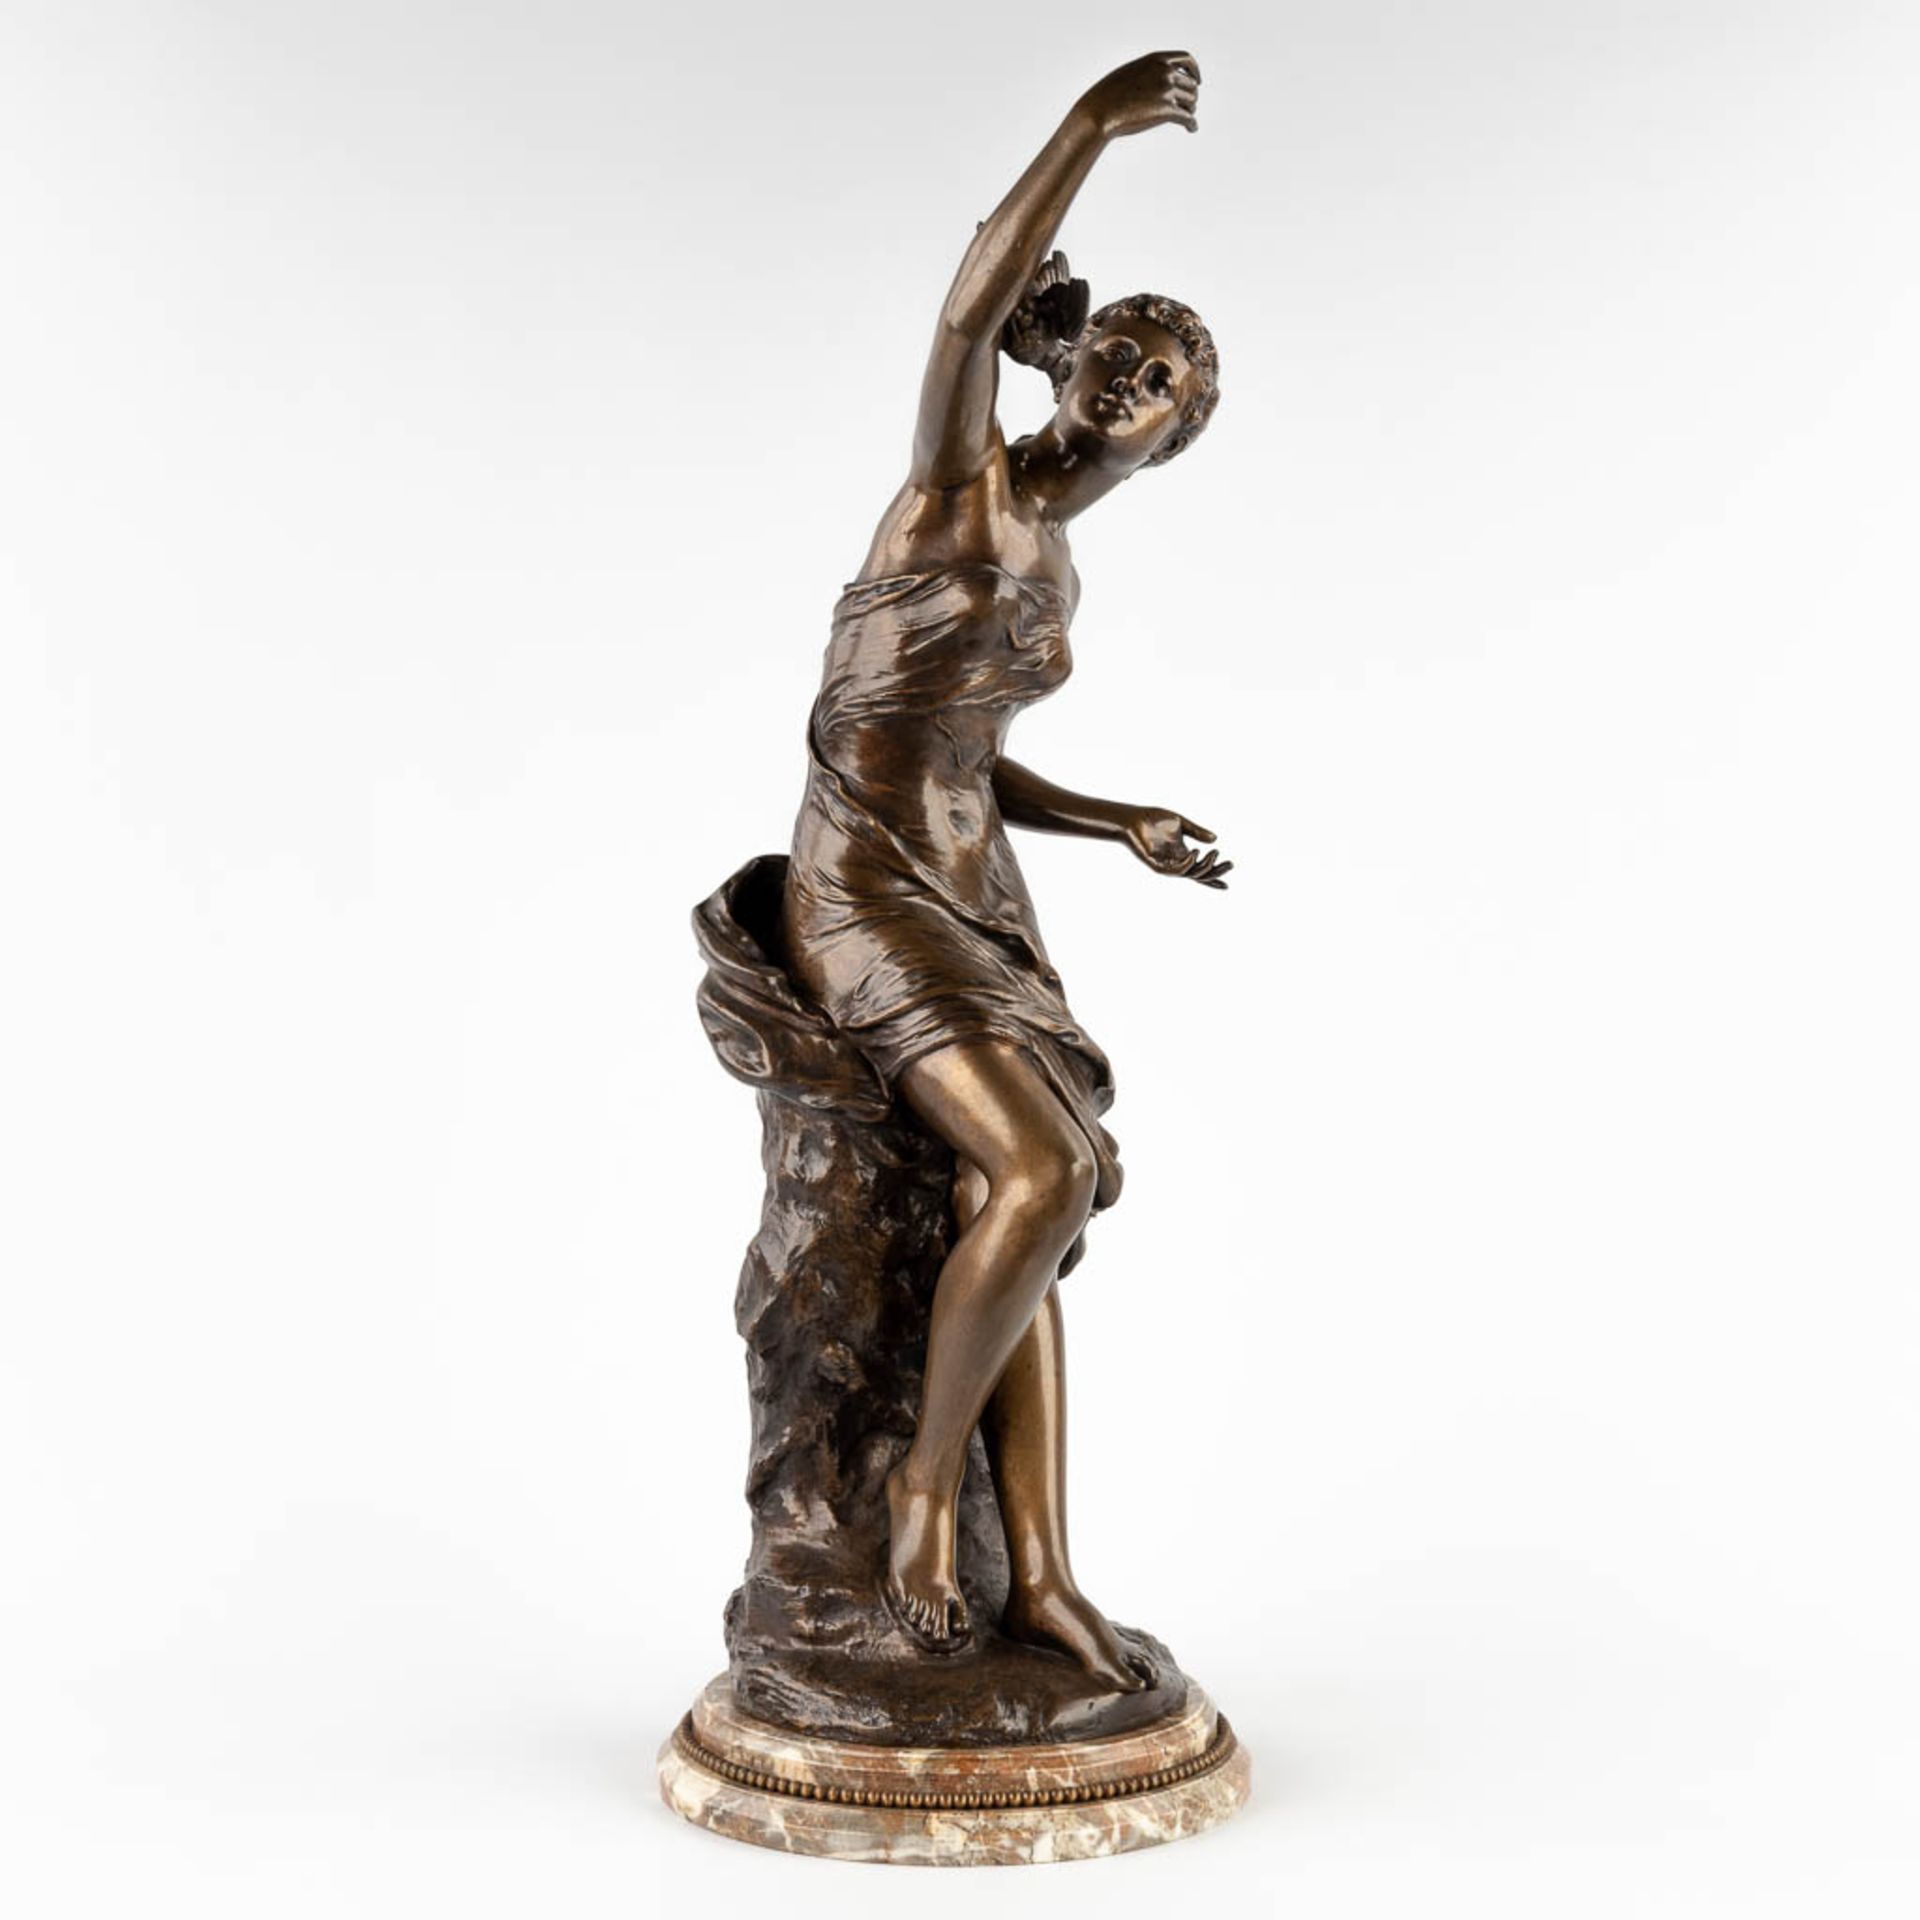 Mathurin MOREAU (1822-1912) 'Lady with a bird' patinated bronze. (H:67 x D:24 cm) - Image 3 of 13